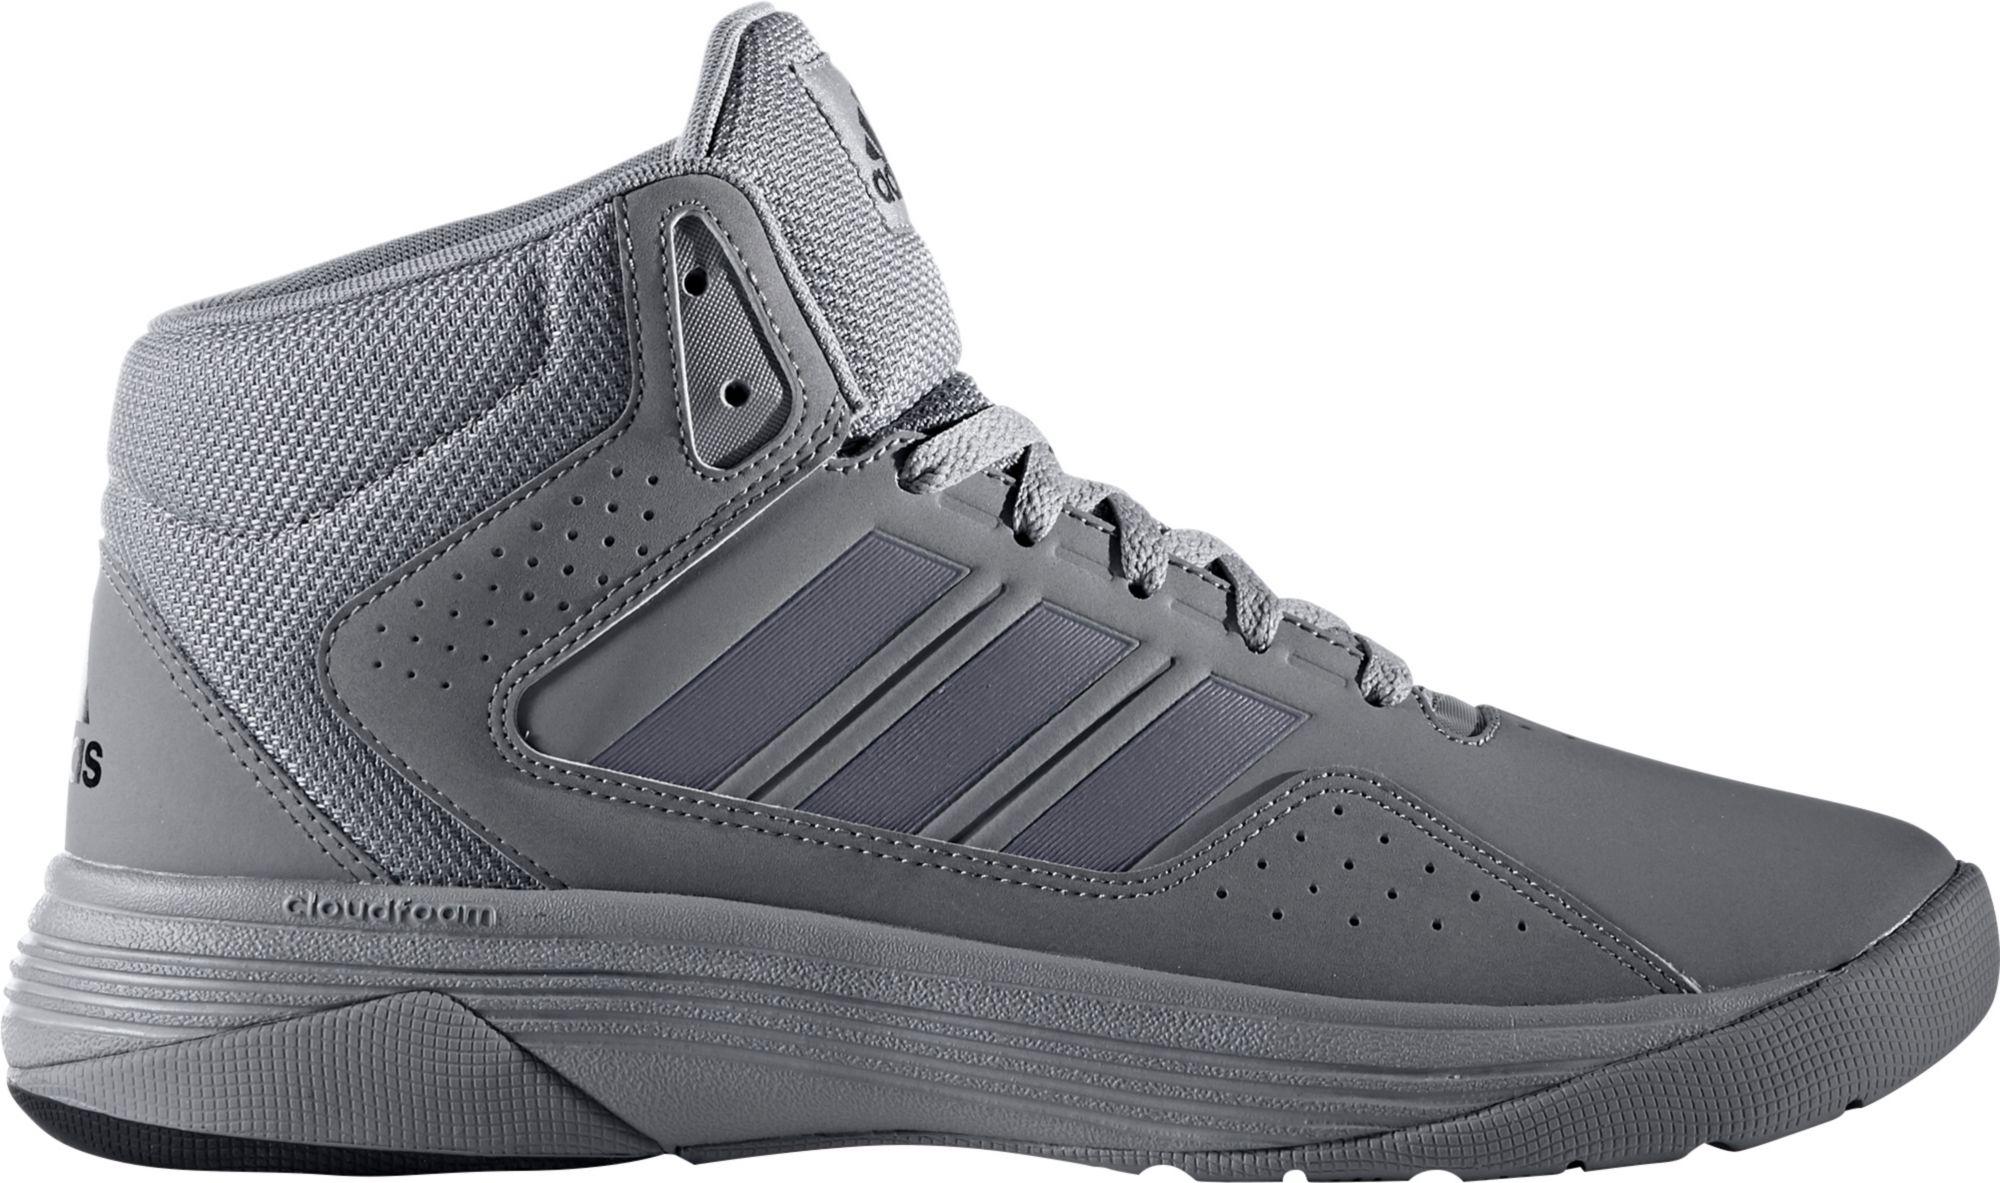 adidas Leather Neo Cloudfoam Ilation Mid Basketball Shoes in Grey/Black  (Gray) for Men | Lyst